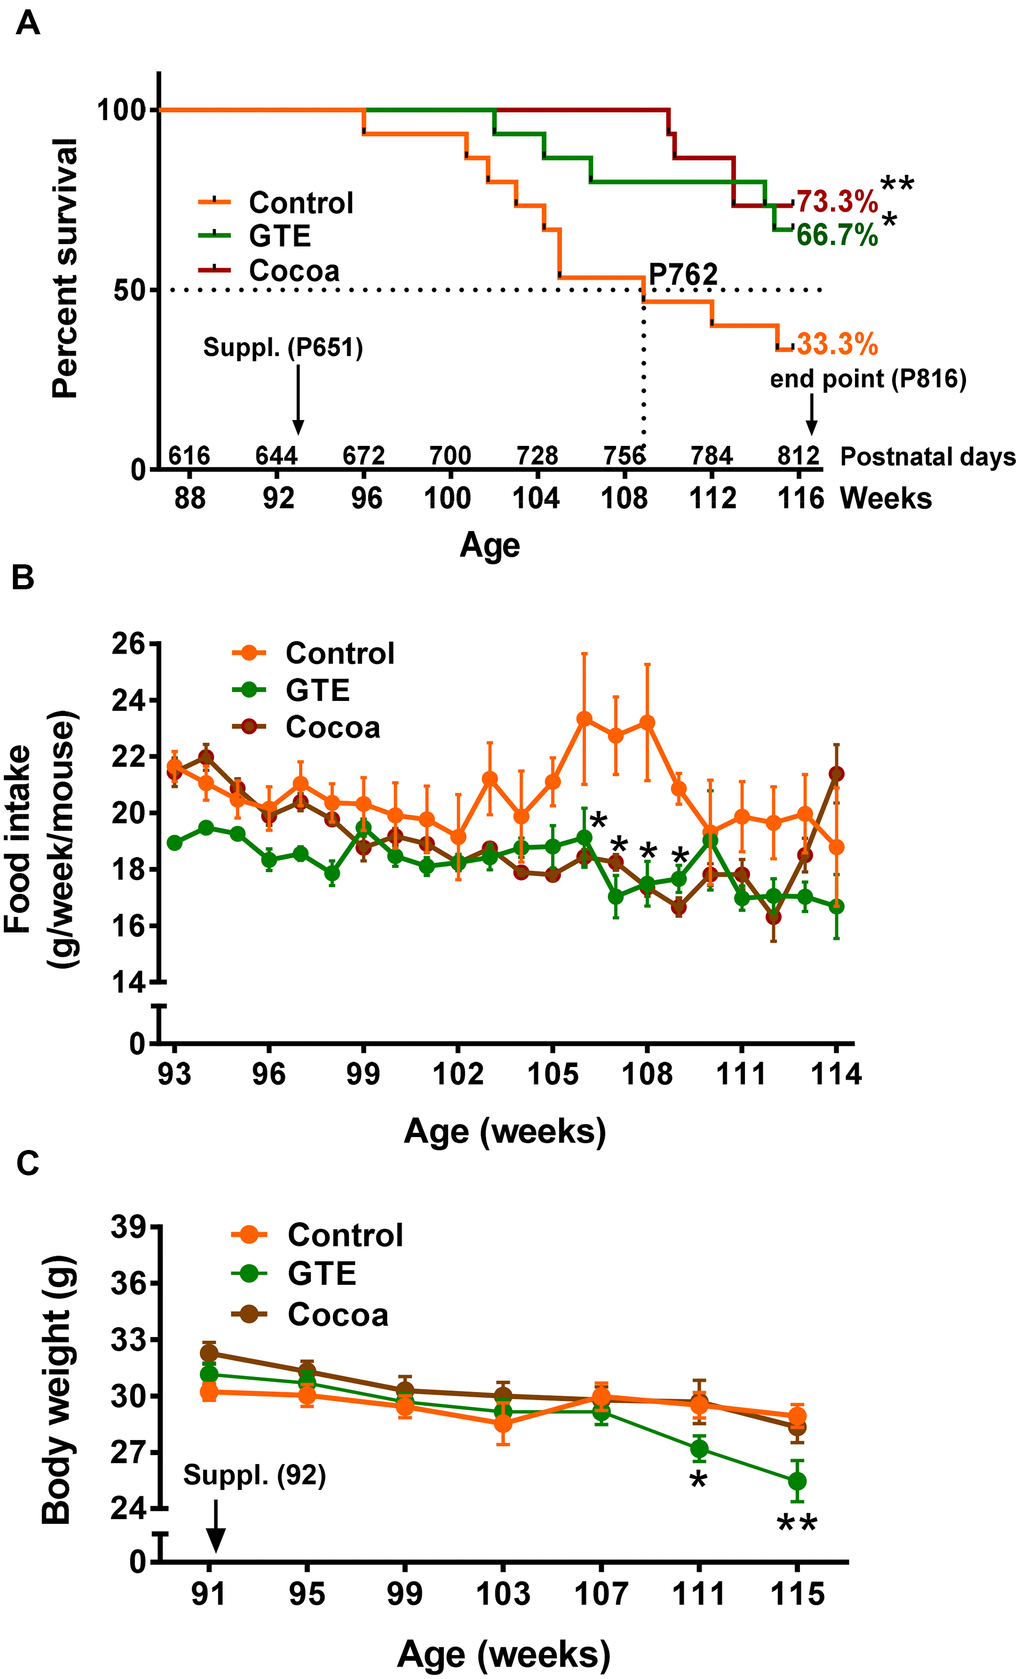 GTE and cocoa supplementations improve mouse survival rate. (A) Survival rate of mice from control, GTE and cocoa groups; the standard (AIN-93M) diet supplemented with either cocoa or GTE significantly increased the percentage of mice that were alive at the endpoint of experiment compared with control animals. (B) Food intake (expressed as g of food per week and mouse) was reduced in animals fed with the GTE- or cocoa-supplemented diets, this reduction being statistically significant in a period ranging from 105-109 weeks of age. (C) Body weight (g) of animals from the three experimental groups; compared to control mice, no significant changes in body weight were found in animals from cocoa group; a significant reduction in weight was, however, observed in GTE-supplemented mice. Data are shown as the mean ± SEM (number of animals per group: 91 weeks of age, n = 15 in all groups; 107 weeks, control n = 8, GTE n = 13; cocoa n = 15; 114 weeks, control n = 6, GTE n = 12, cocoa n = 11); *p p A) and multiple t-test (Bonferroni correction), in (B, C).